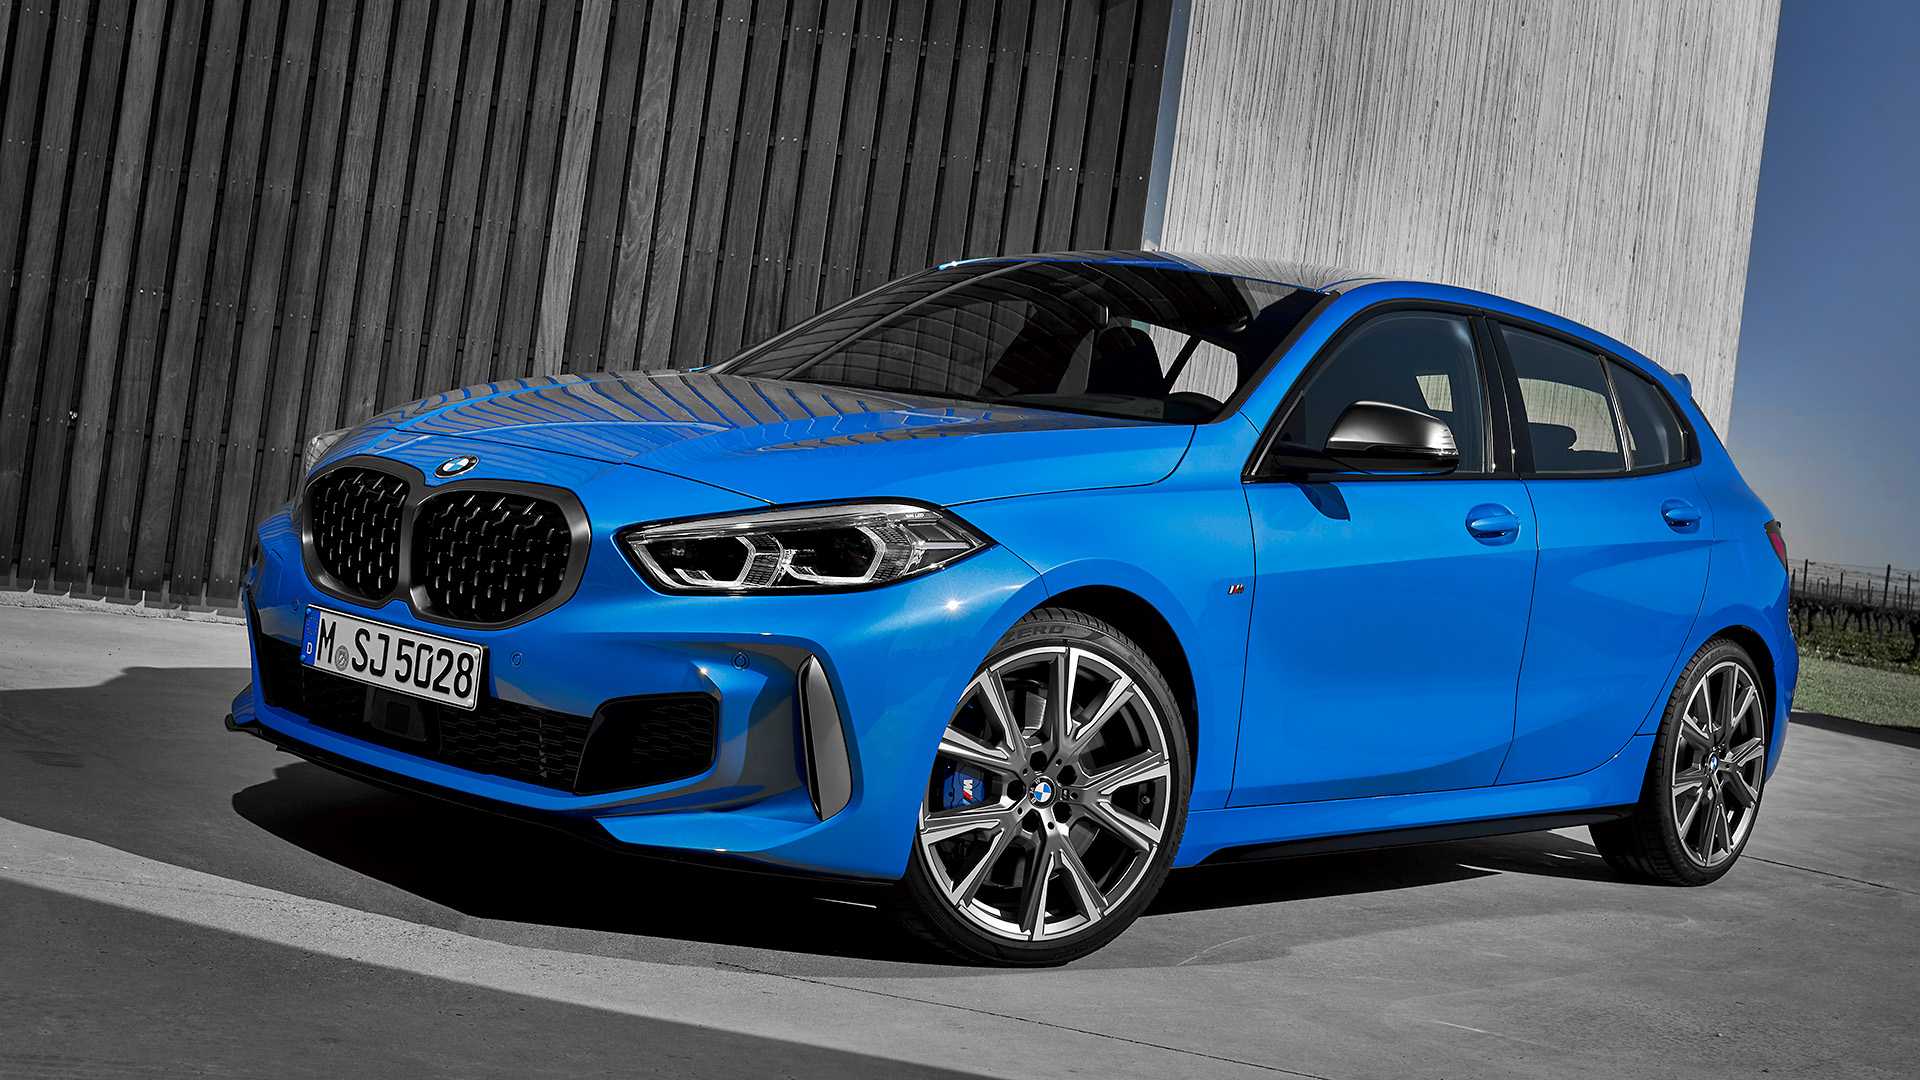 2020 Bmw 1 Series Hatchback Debuts With 20 Liter Turbo Engine In M135i